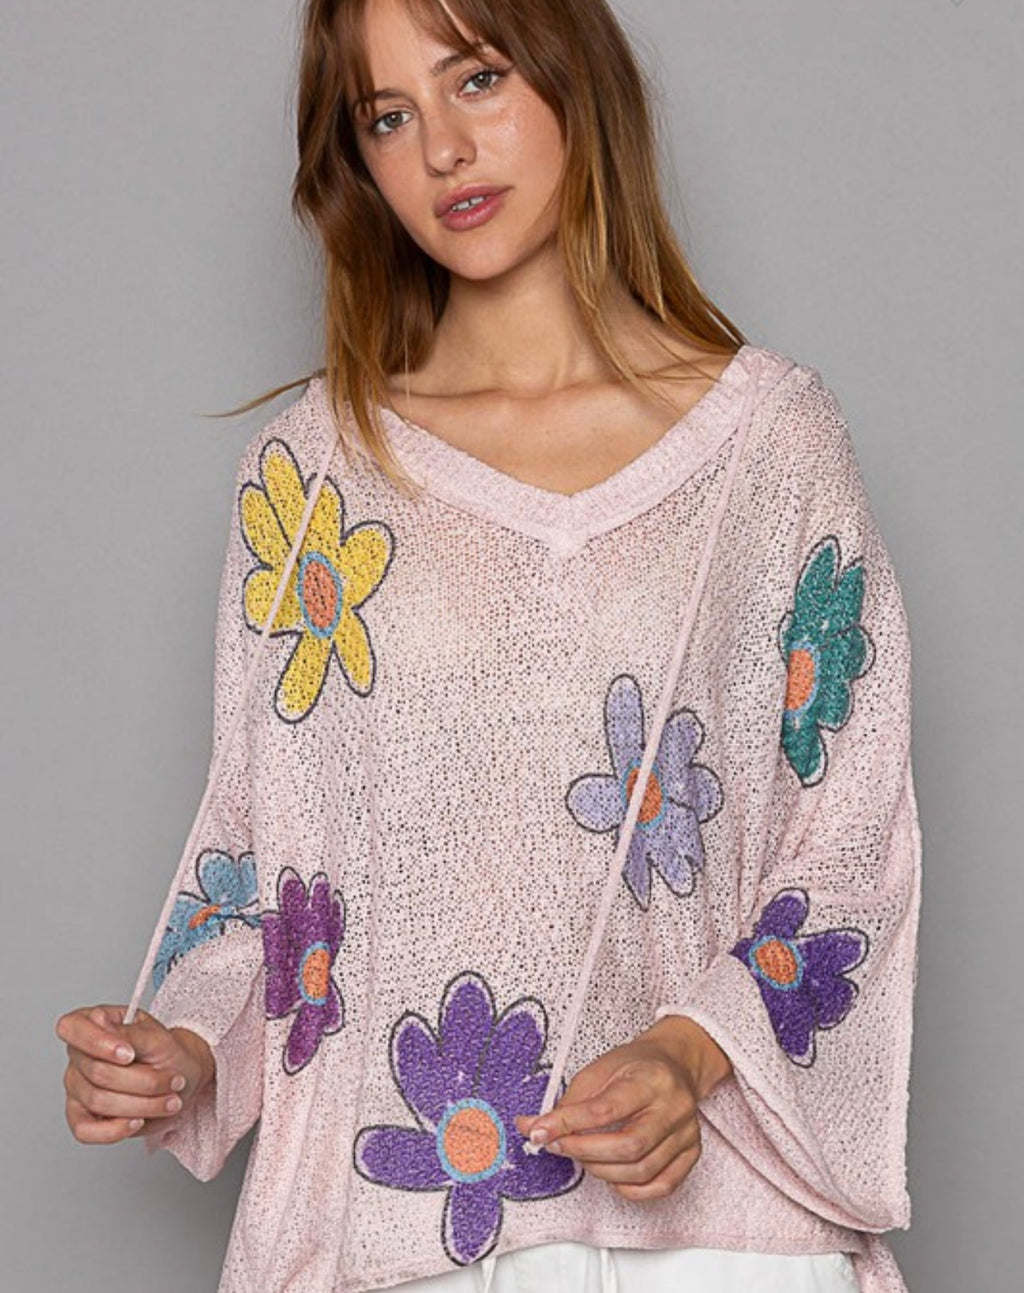 Daisy Love Hooded Pullover - Pink